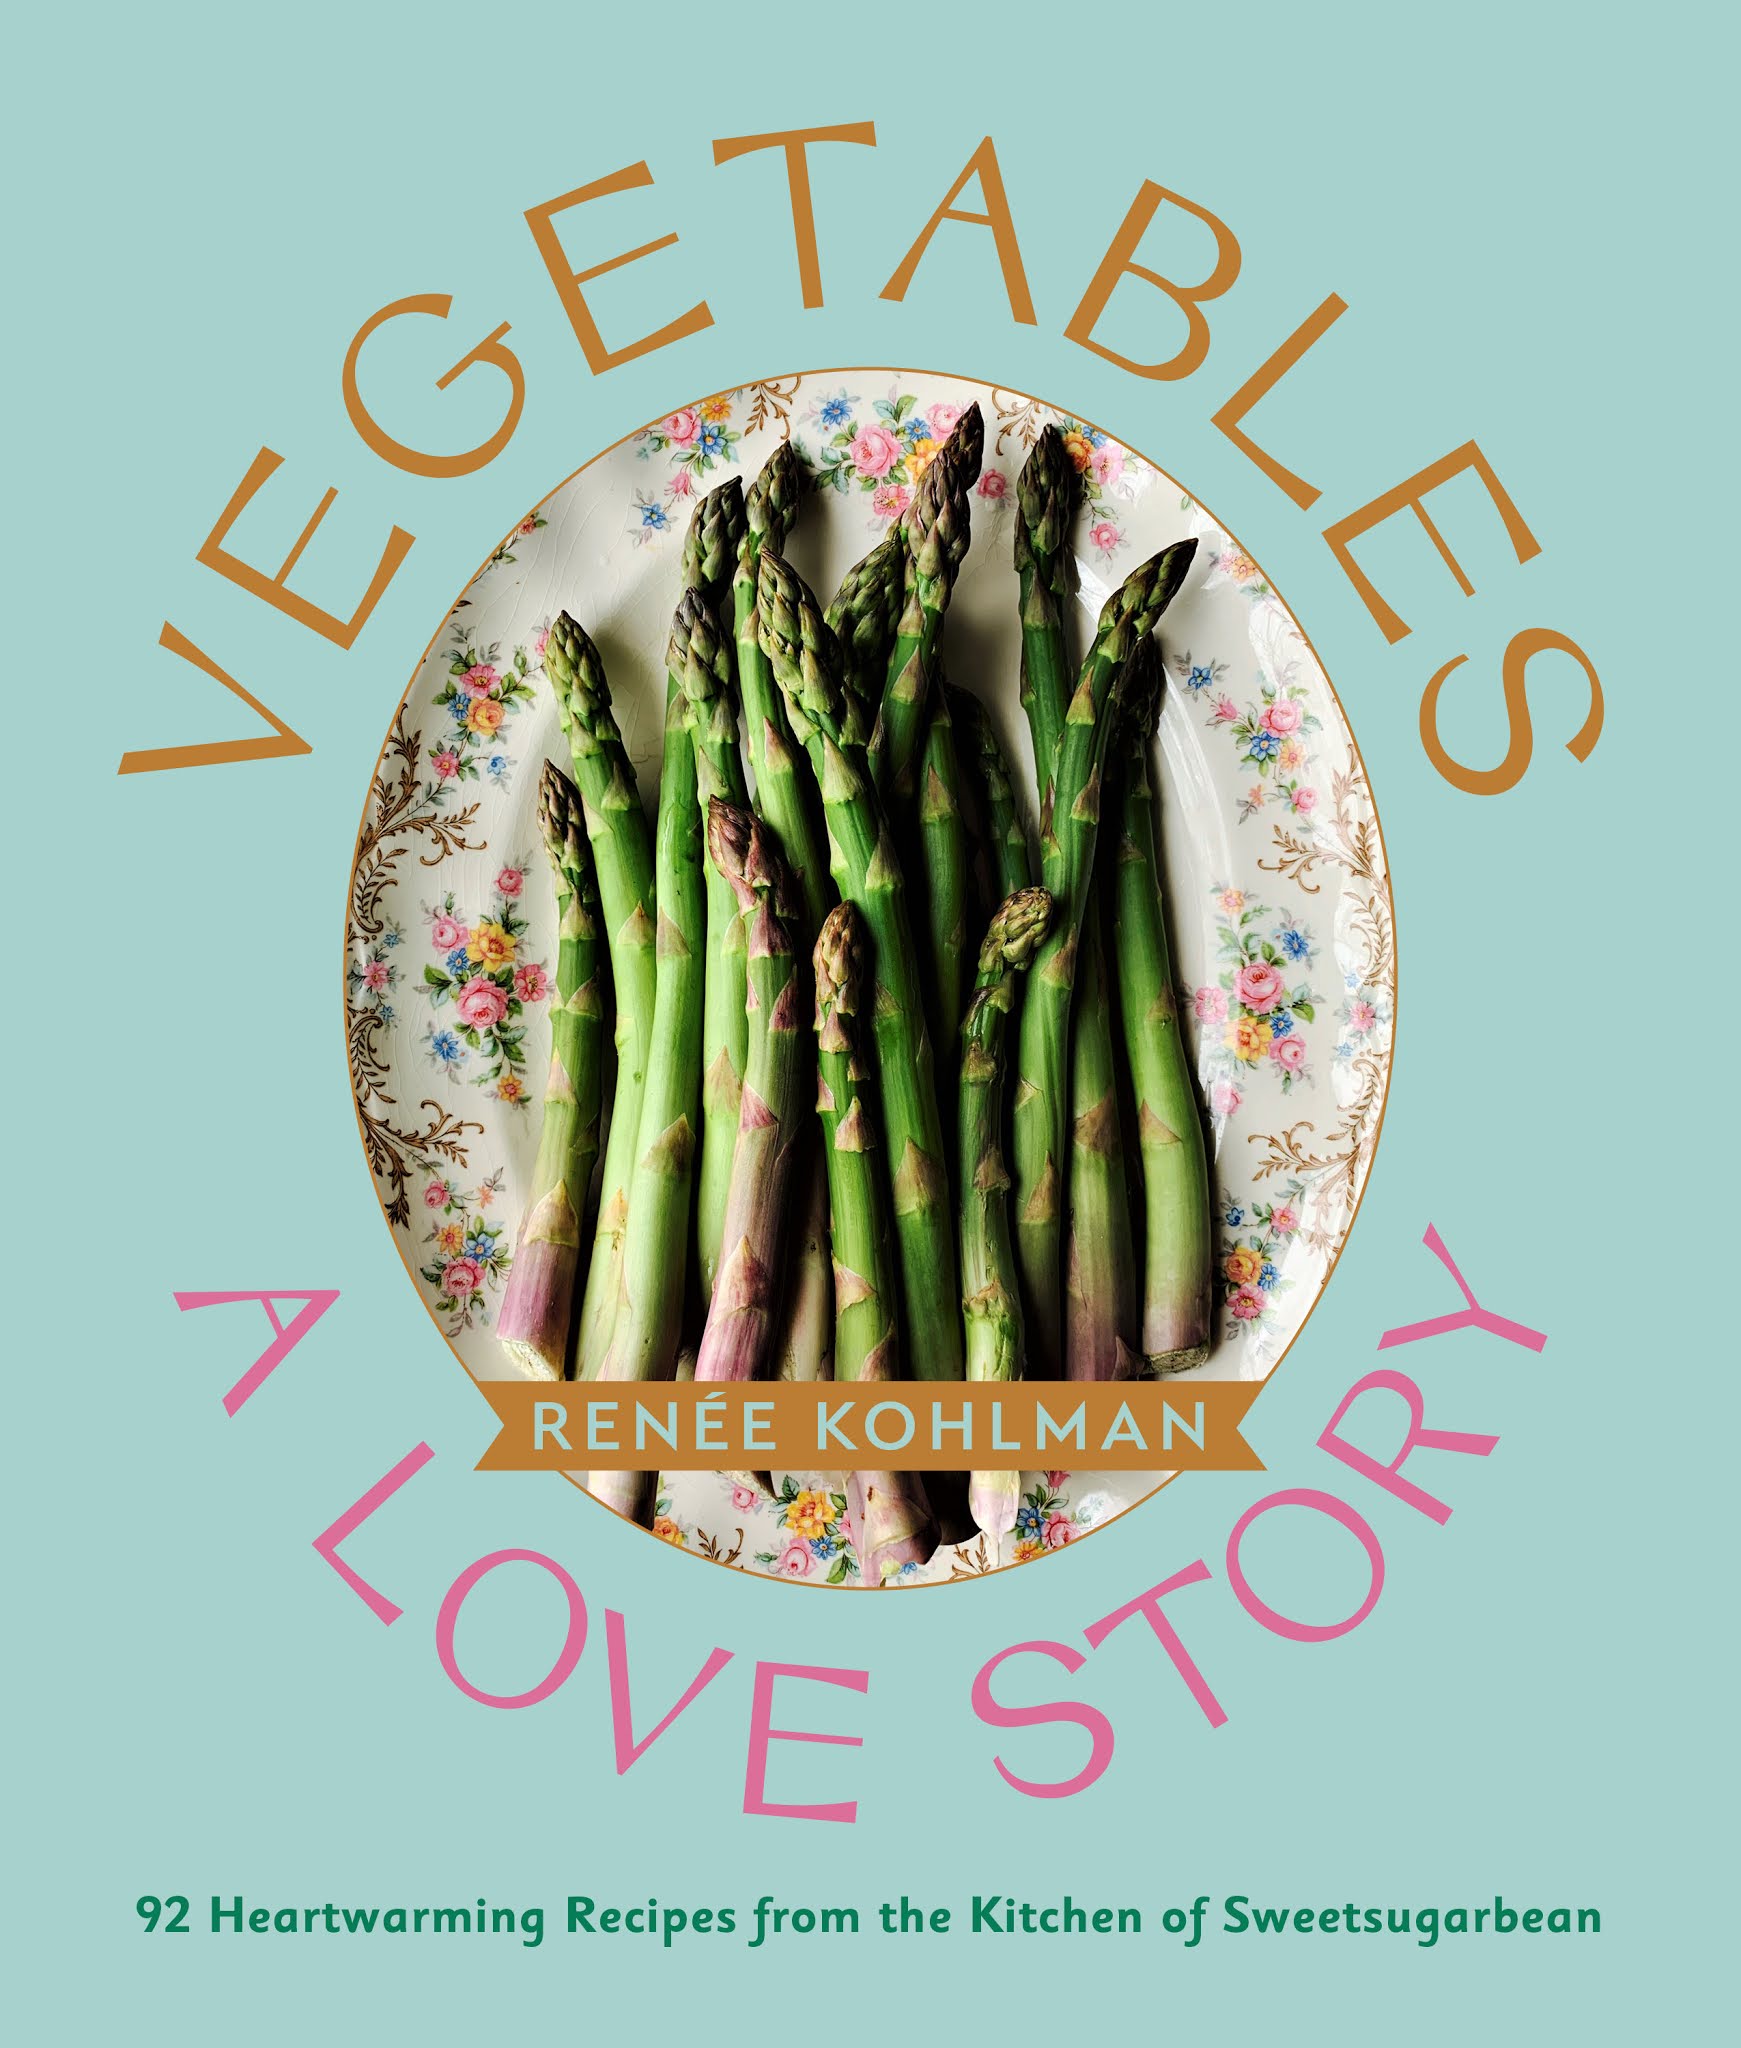 the cover of the new cook book 'Vegetables, a love story' by Renee Kohlman